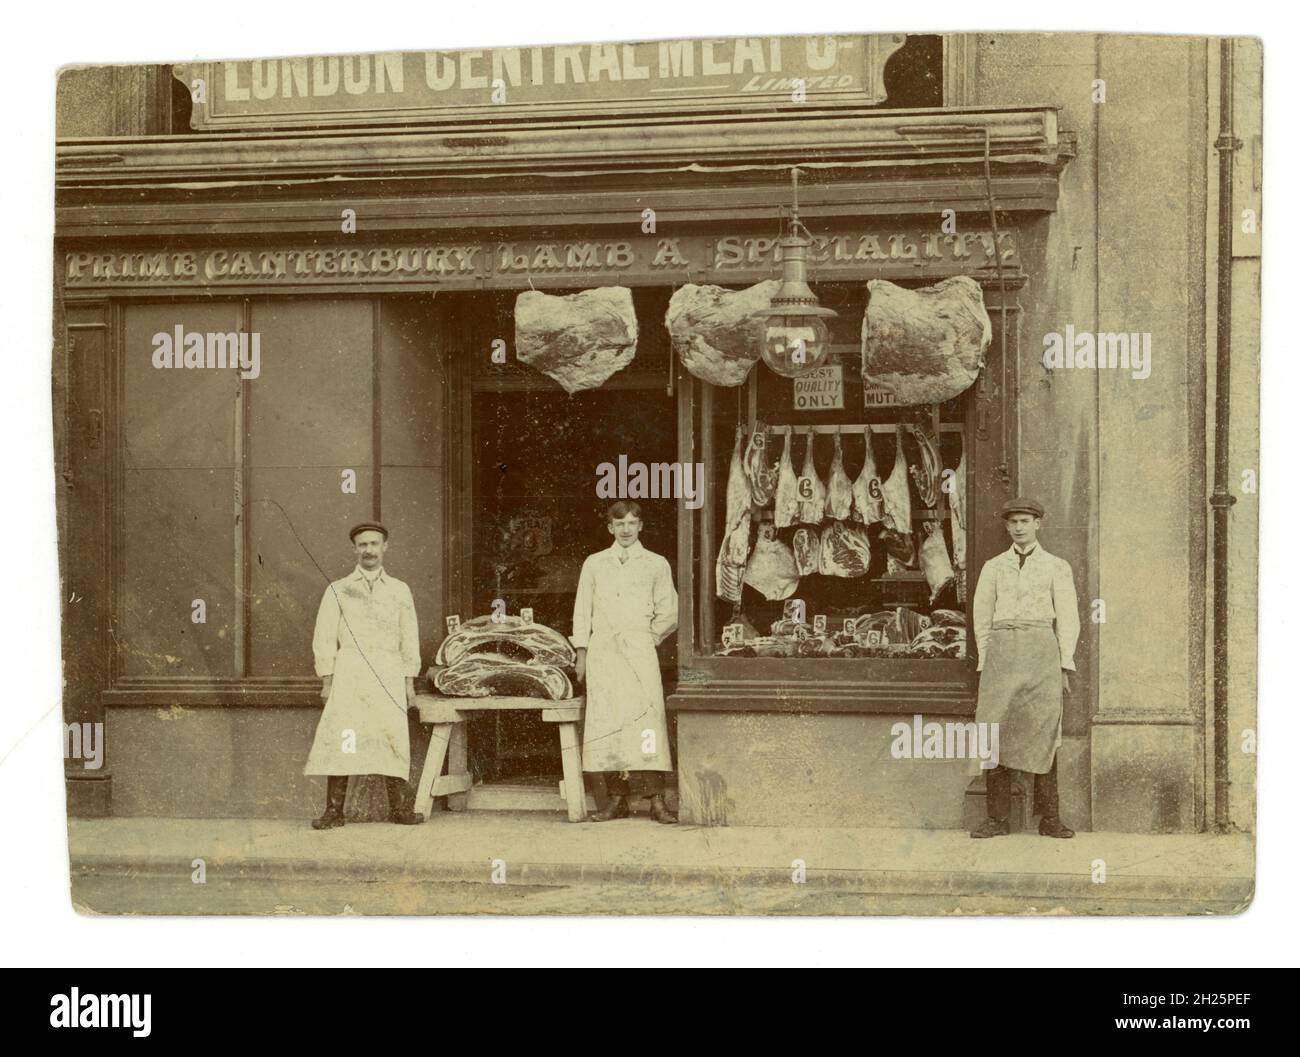 Original Victorian or early Edwardian postcard of the shop front of a butchers shop, huge slabs of meat - beef and lamb on display. Victorian shop. The proprietor or manager stands with his young assistants, apprentices outside, 'London Central Meat Company', 'Canterbury Lamb A Speciality' signs. Photographer: Thomas Bolton, Market Place, Ely, Cambridgeshire, U.K. circa 1901-1904 Stock Photo